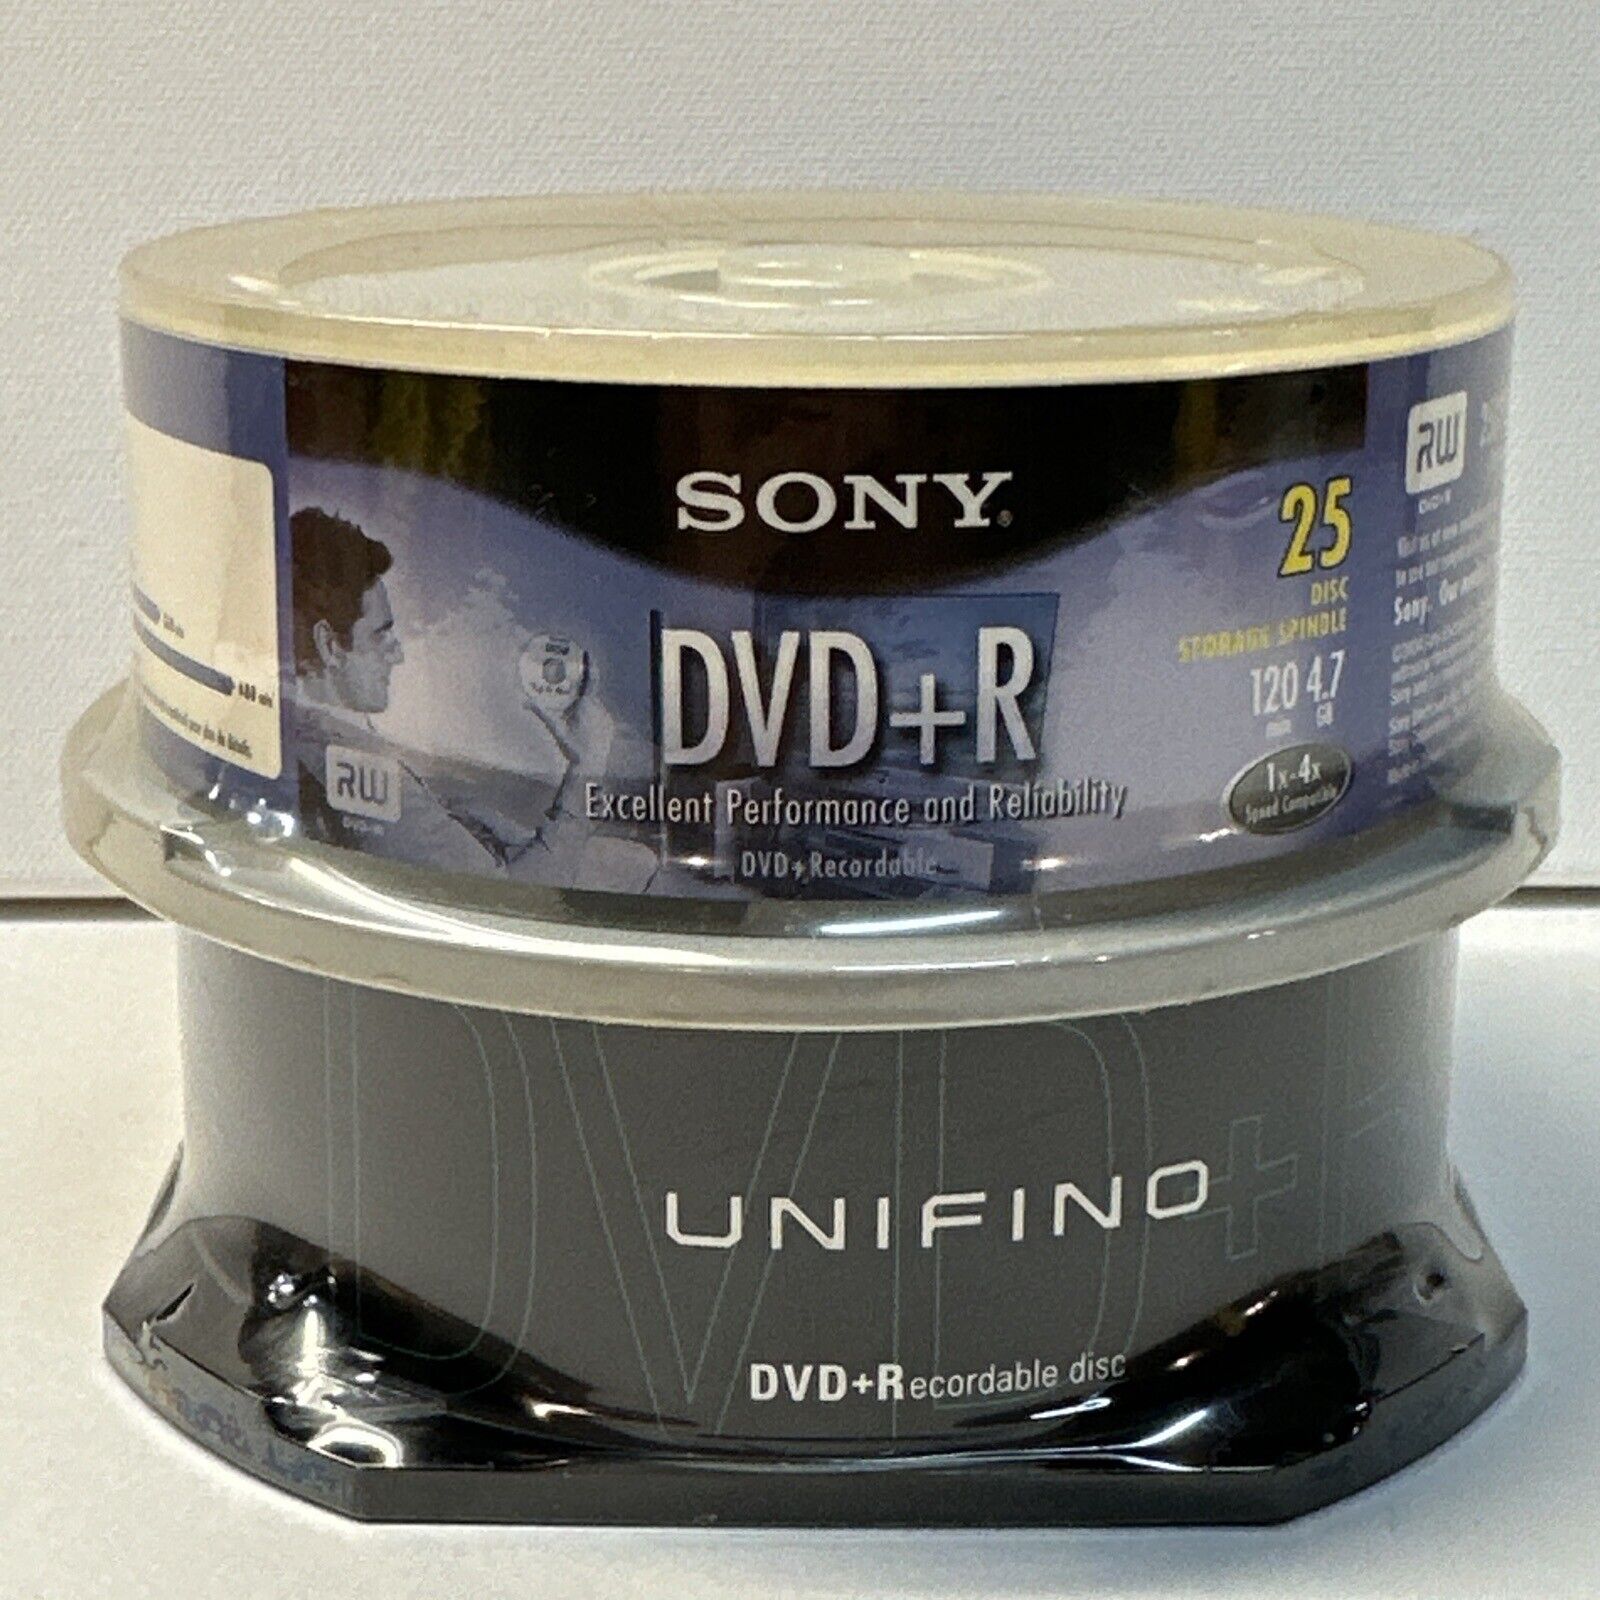 Sony DVDR Spindle 25 Pack 4.7GB 120 Min 1-16X + Unifino (50 Total Discs) DVD R